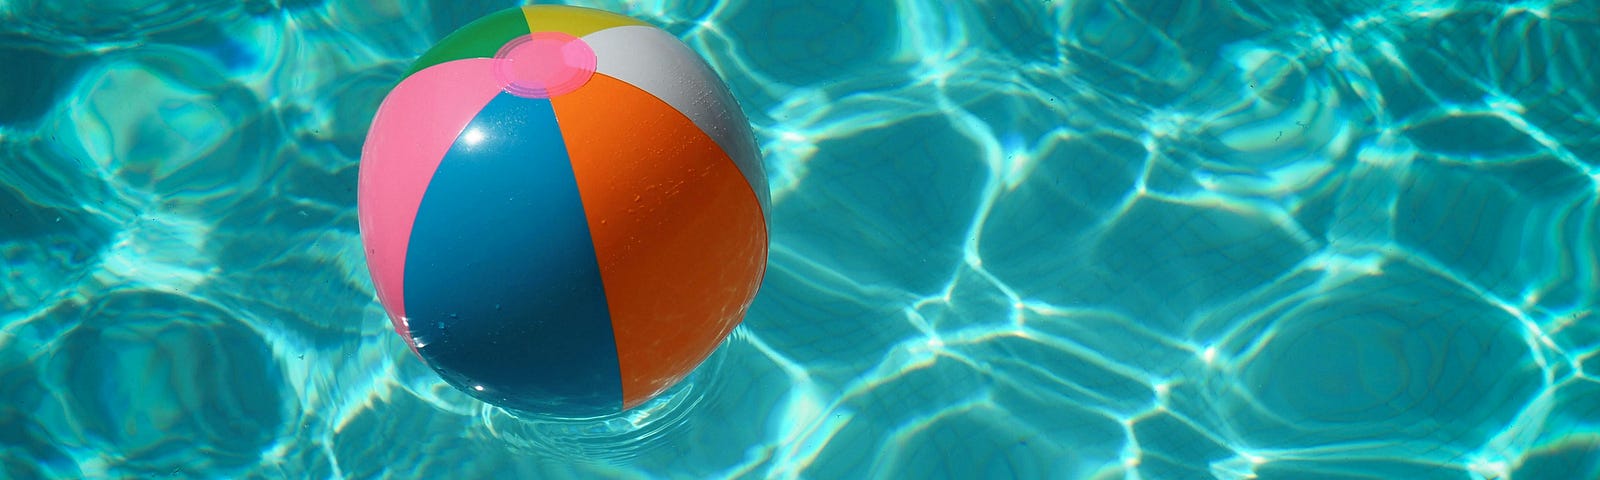 green, yell, white, orange, blue, pink striped beach ball in a turquoise pool